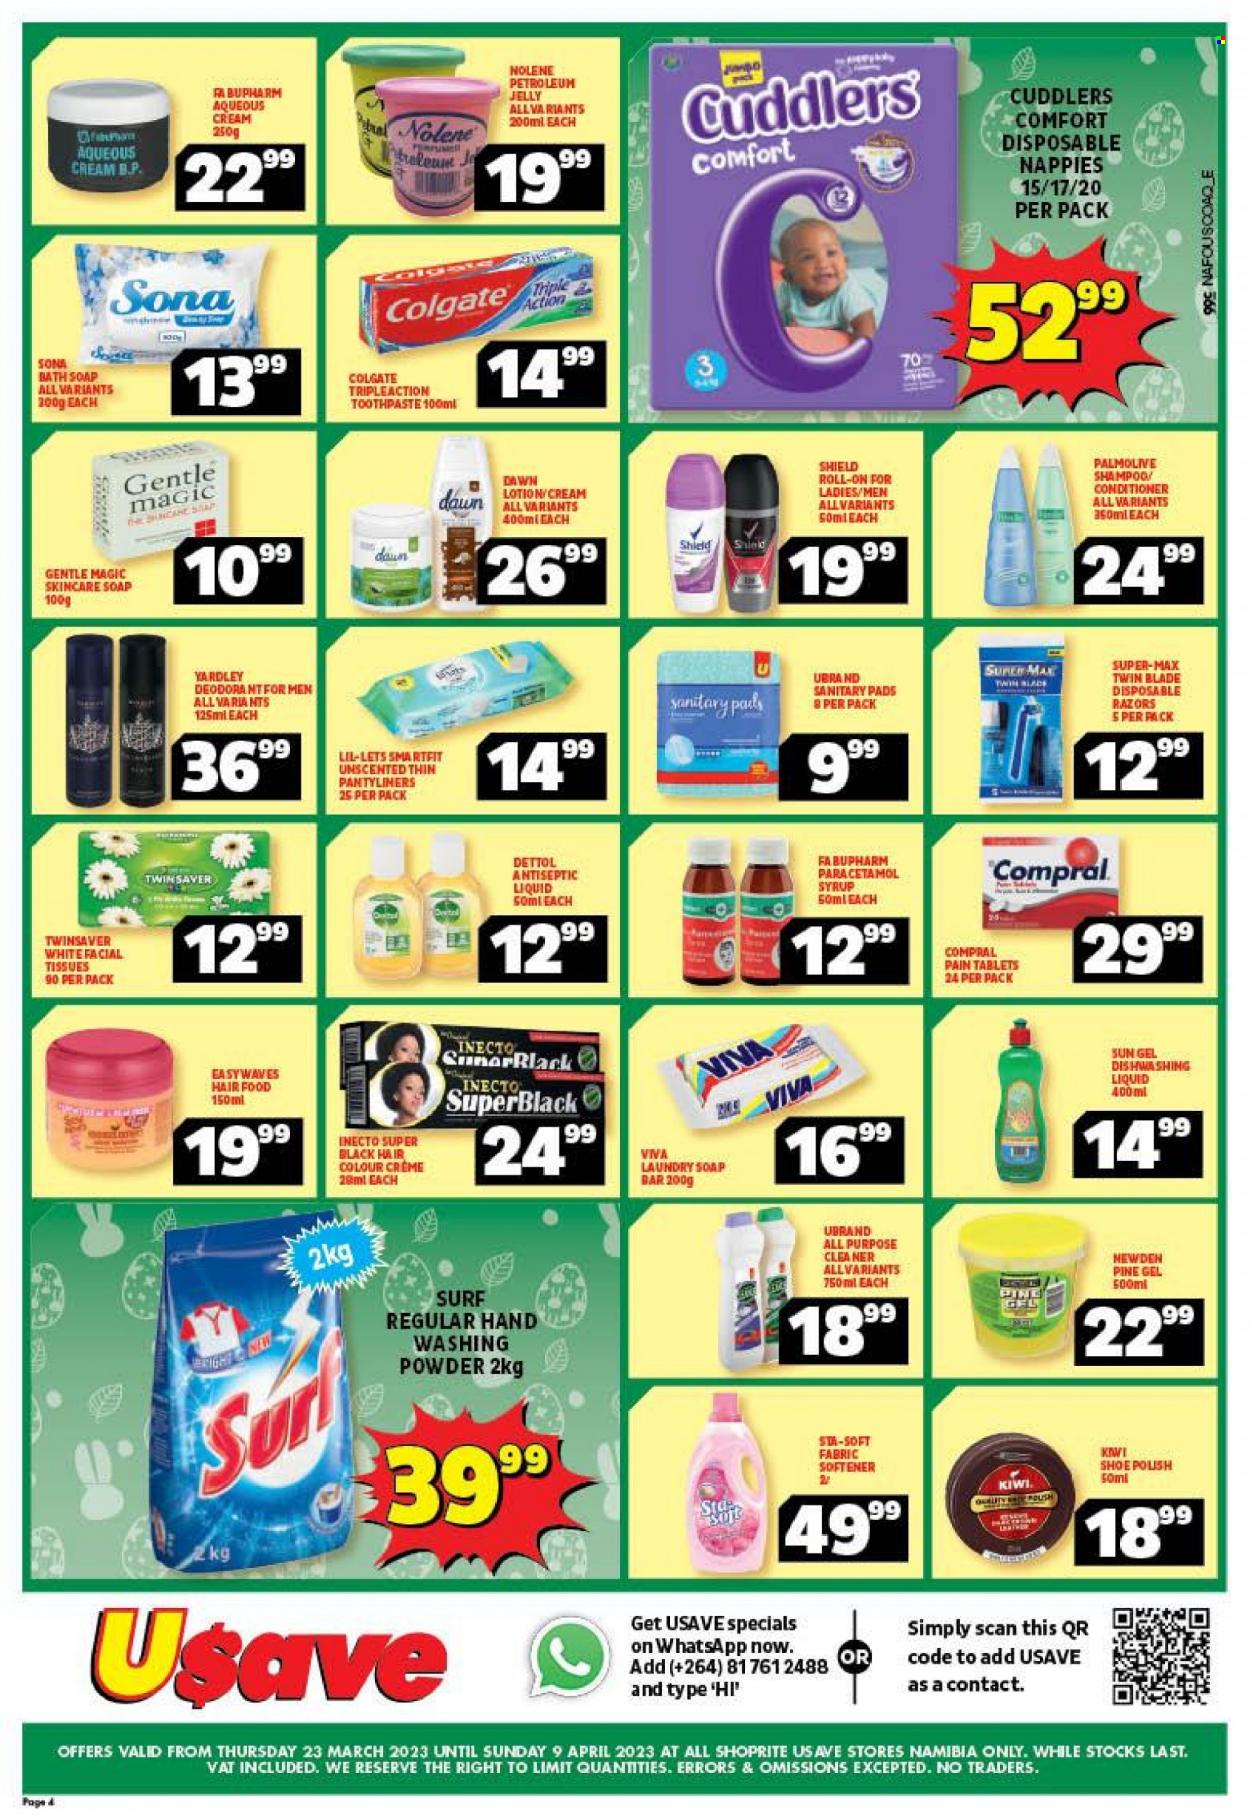 thumbnail - Shoprite catalogue  - 23/03/2023 - 09/04/2023 - Sales products - kiwi, syrup, nappies, tissues, Dettol, all purpose cleaner, cleaner, fabric softener, laundry powder, laundry soap bar, Surf, dishwashing liquid, shampoo, Palmolive, soap bar, soap, Colgate, toothpaste, sanitary pads, pantyliners, Lil-lets, facial tissues, petroleum jelly, Gentle Magic, conditioner, hair color, body lotion, disposable razor. Page 3.